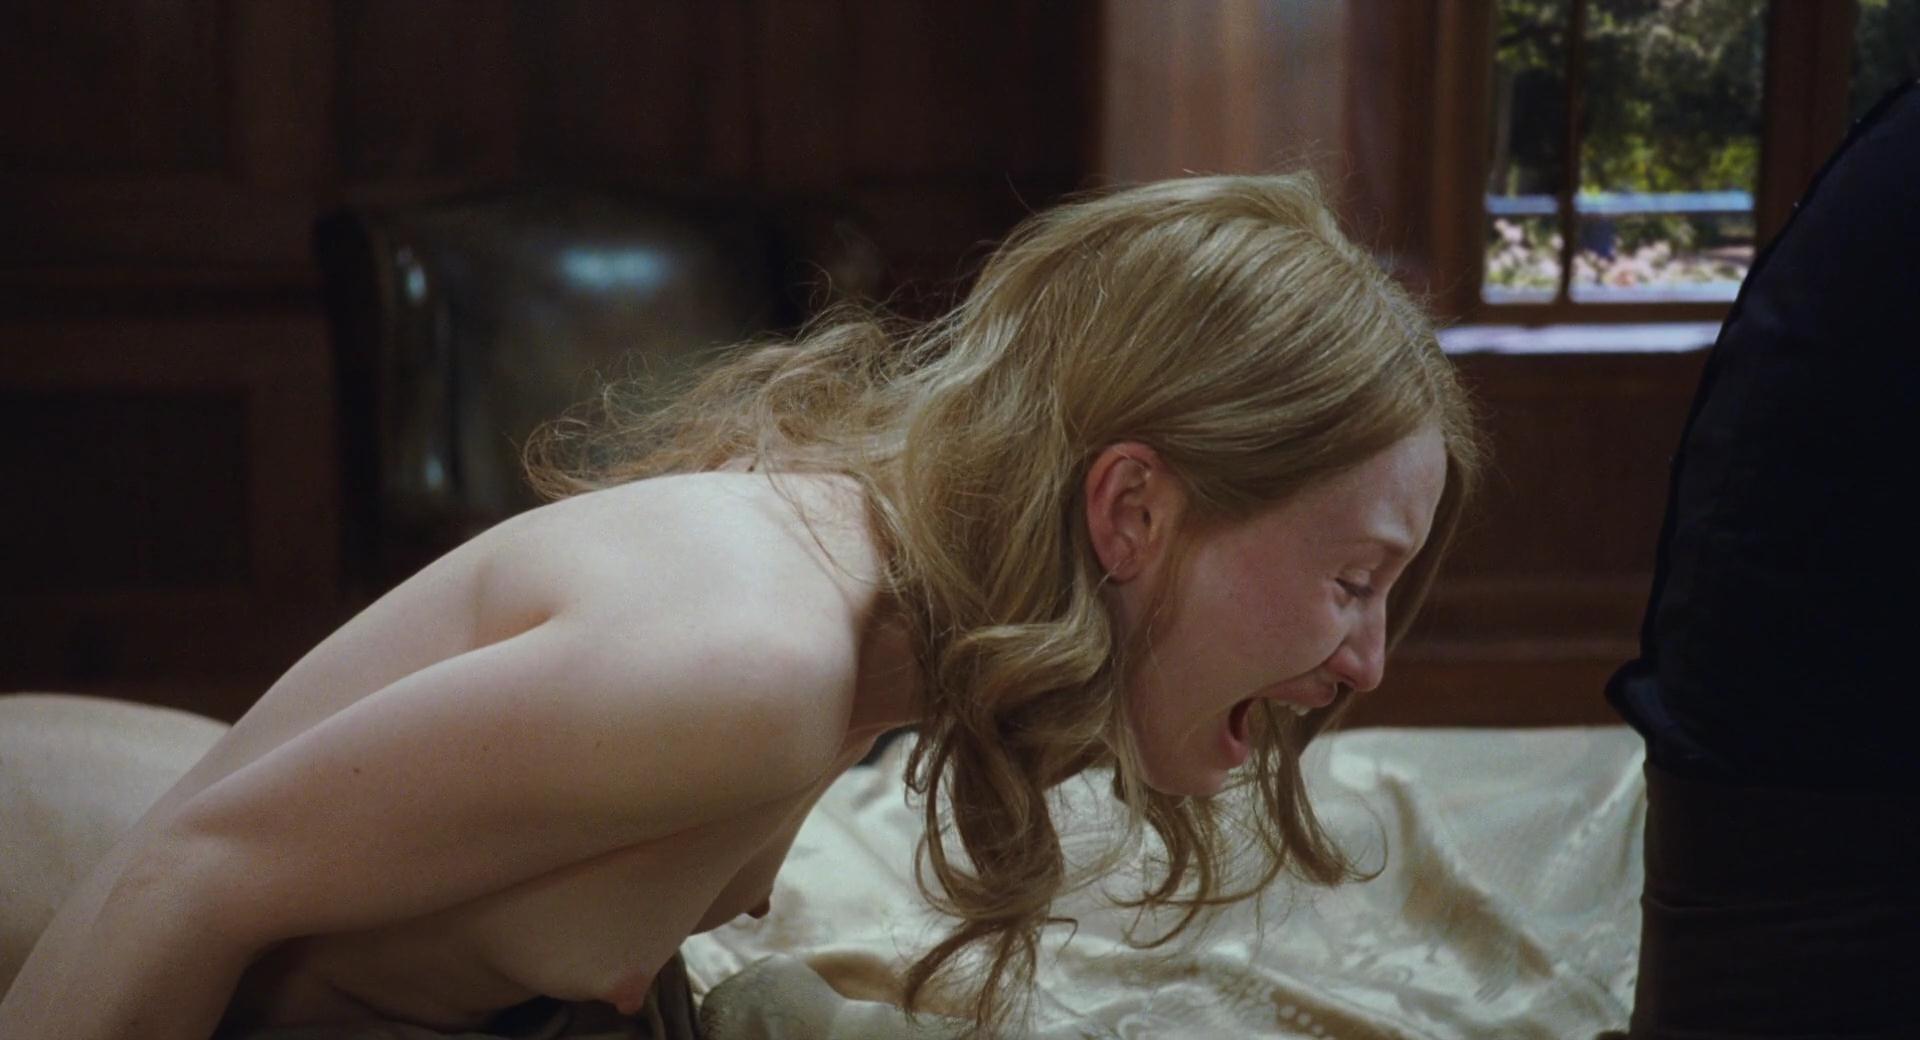 Emily Browning Nude Pics Page 10